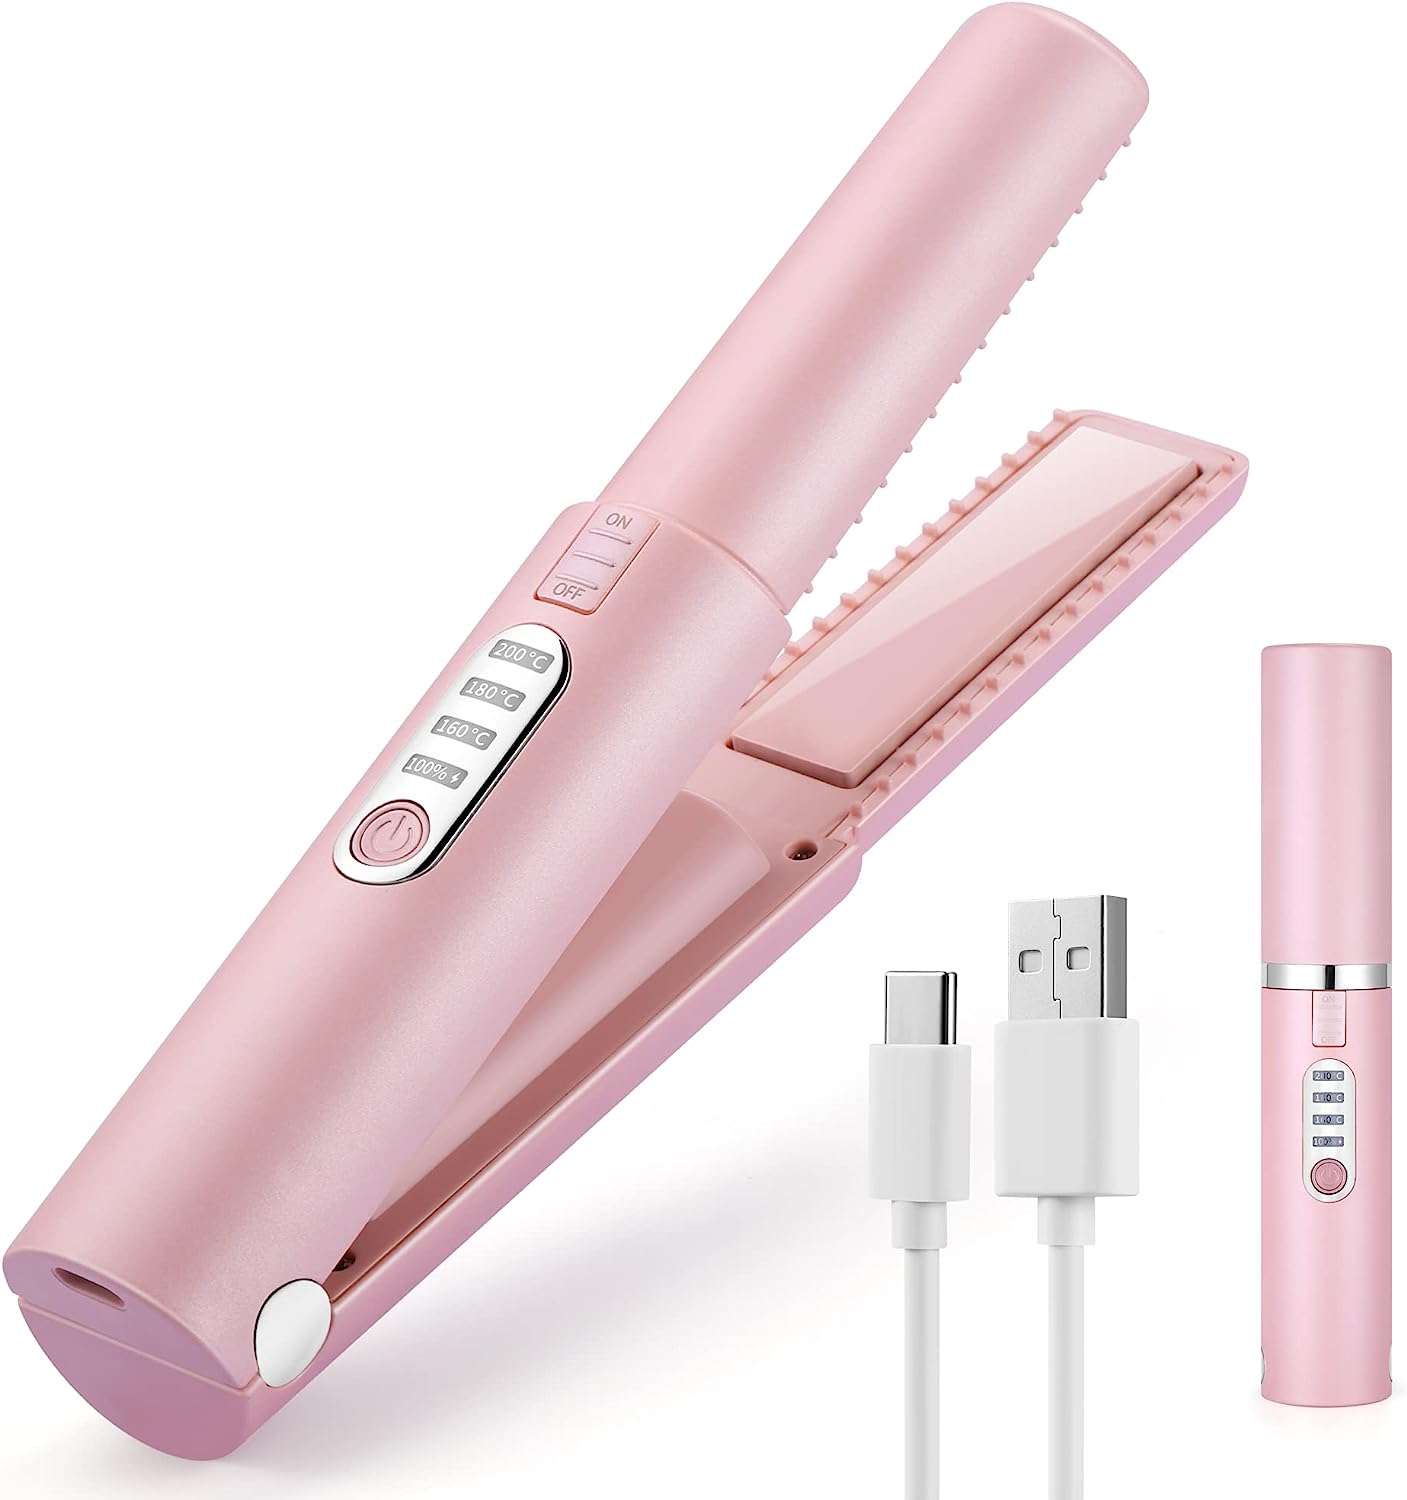 Hair Straightener, Cordless Straightener, Portable Flat Iron for Hair,  USB-C Rechargeable Ceramic Mini Flat Iron with 4800mA Battery, Adjustable